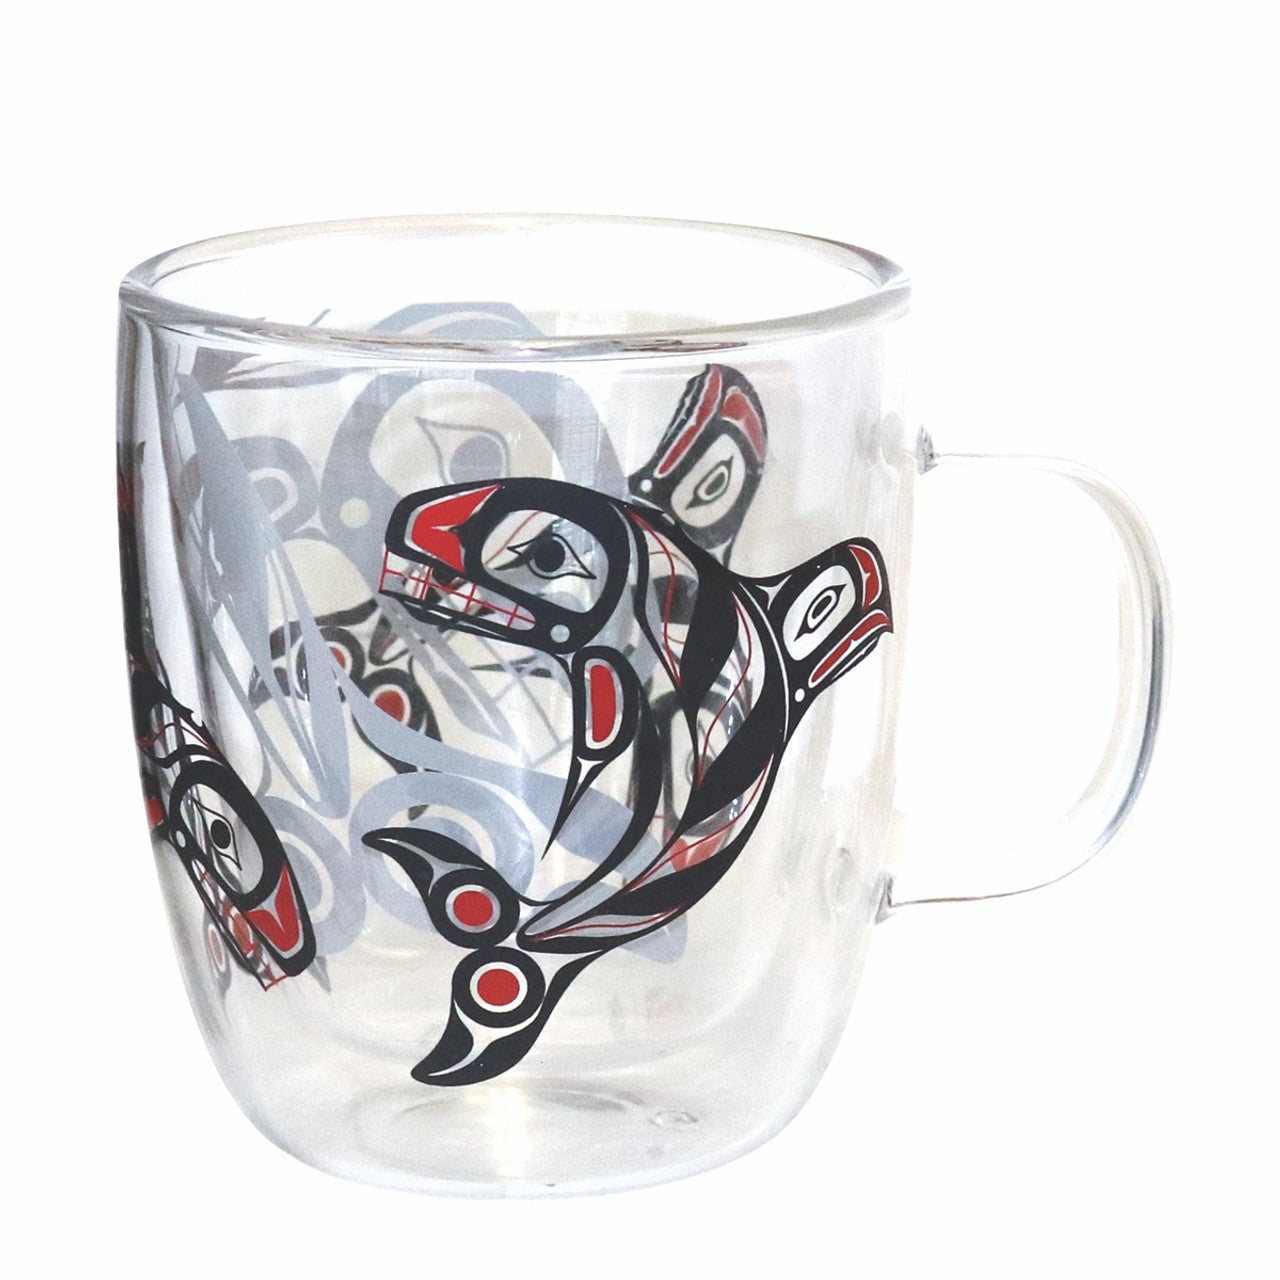 DOUBLE-WALLED GLASS MUGS - 12oz / Raven Fin Killer Whale - GMUG14 - House of Himwitsa Native Art Gallery and Gifts